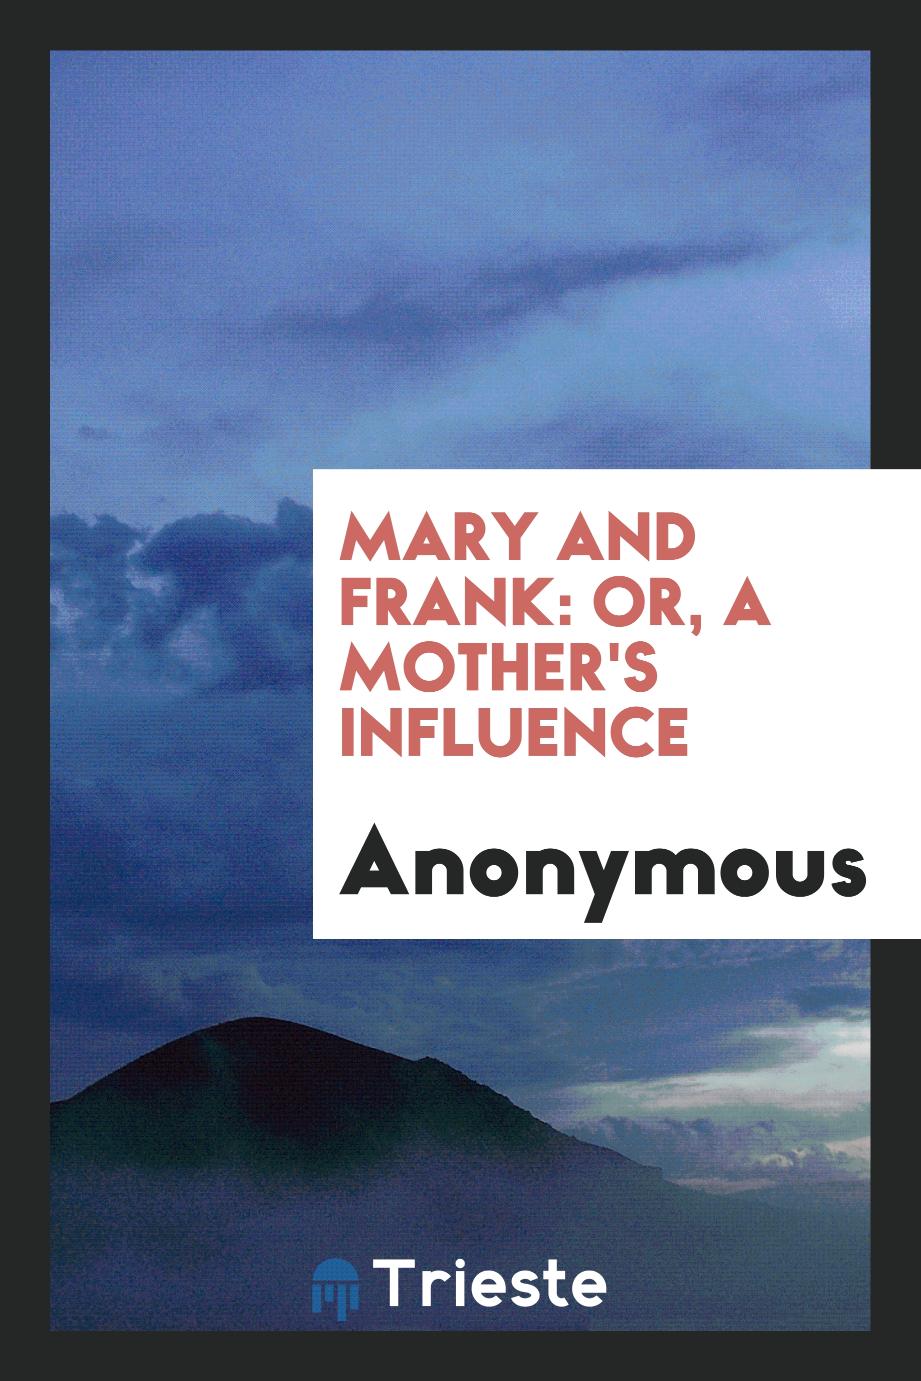 Mary and Frank: Or, a Mother's Influence